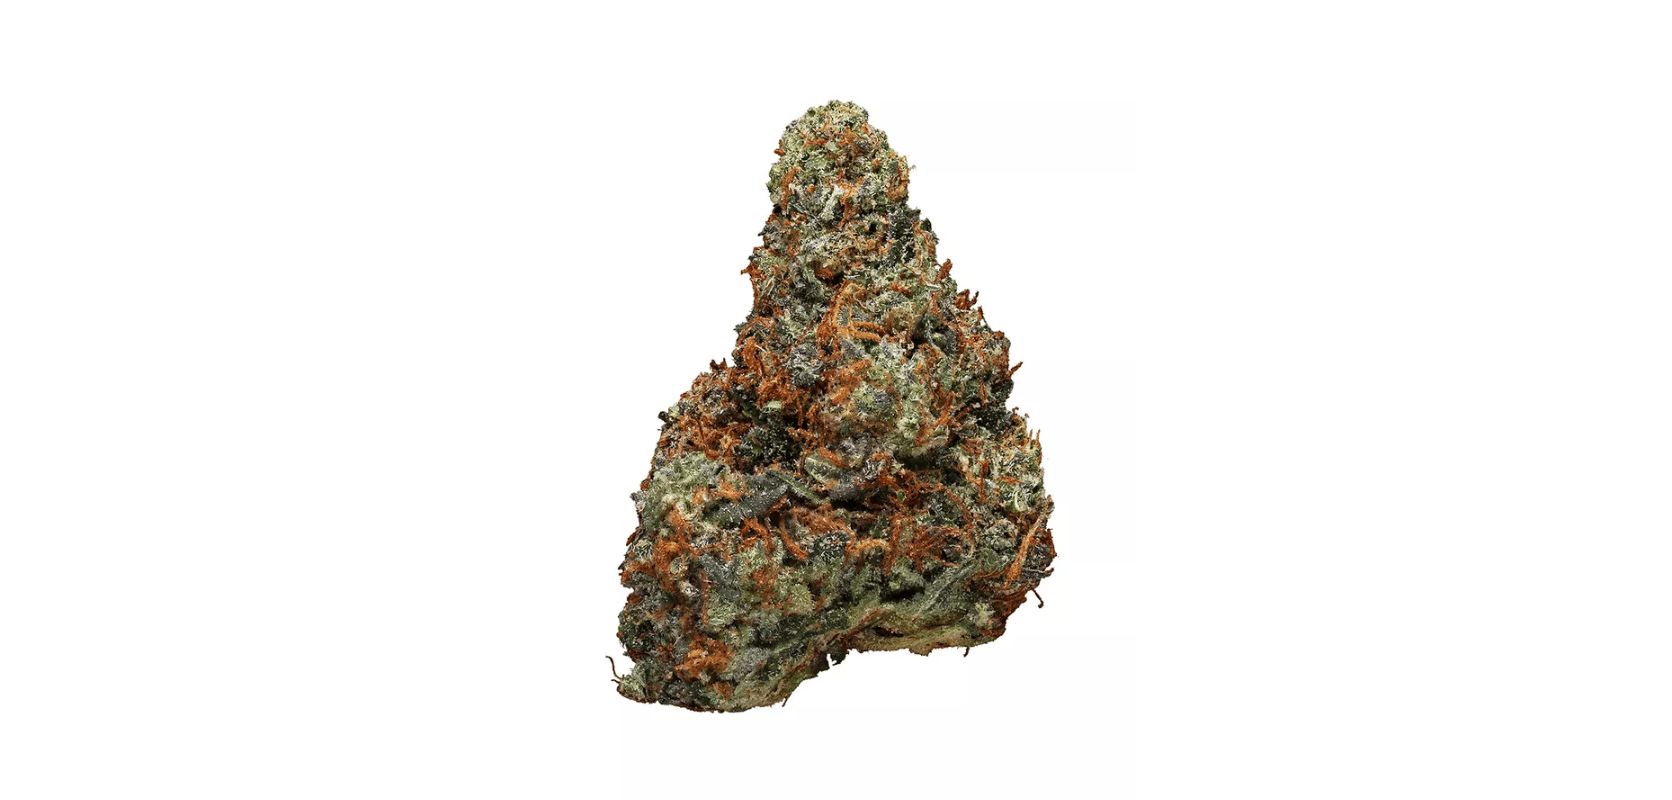 In a nutshell, the Rockstar strain is an Indica-leaning hybrid, with an Indica to Sativa ratio of 70 to 30 percent. 